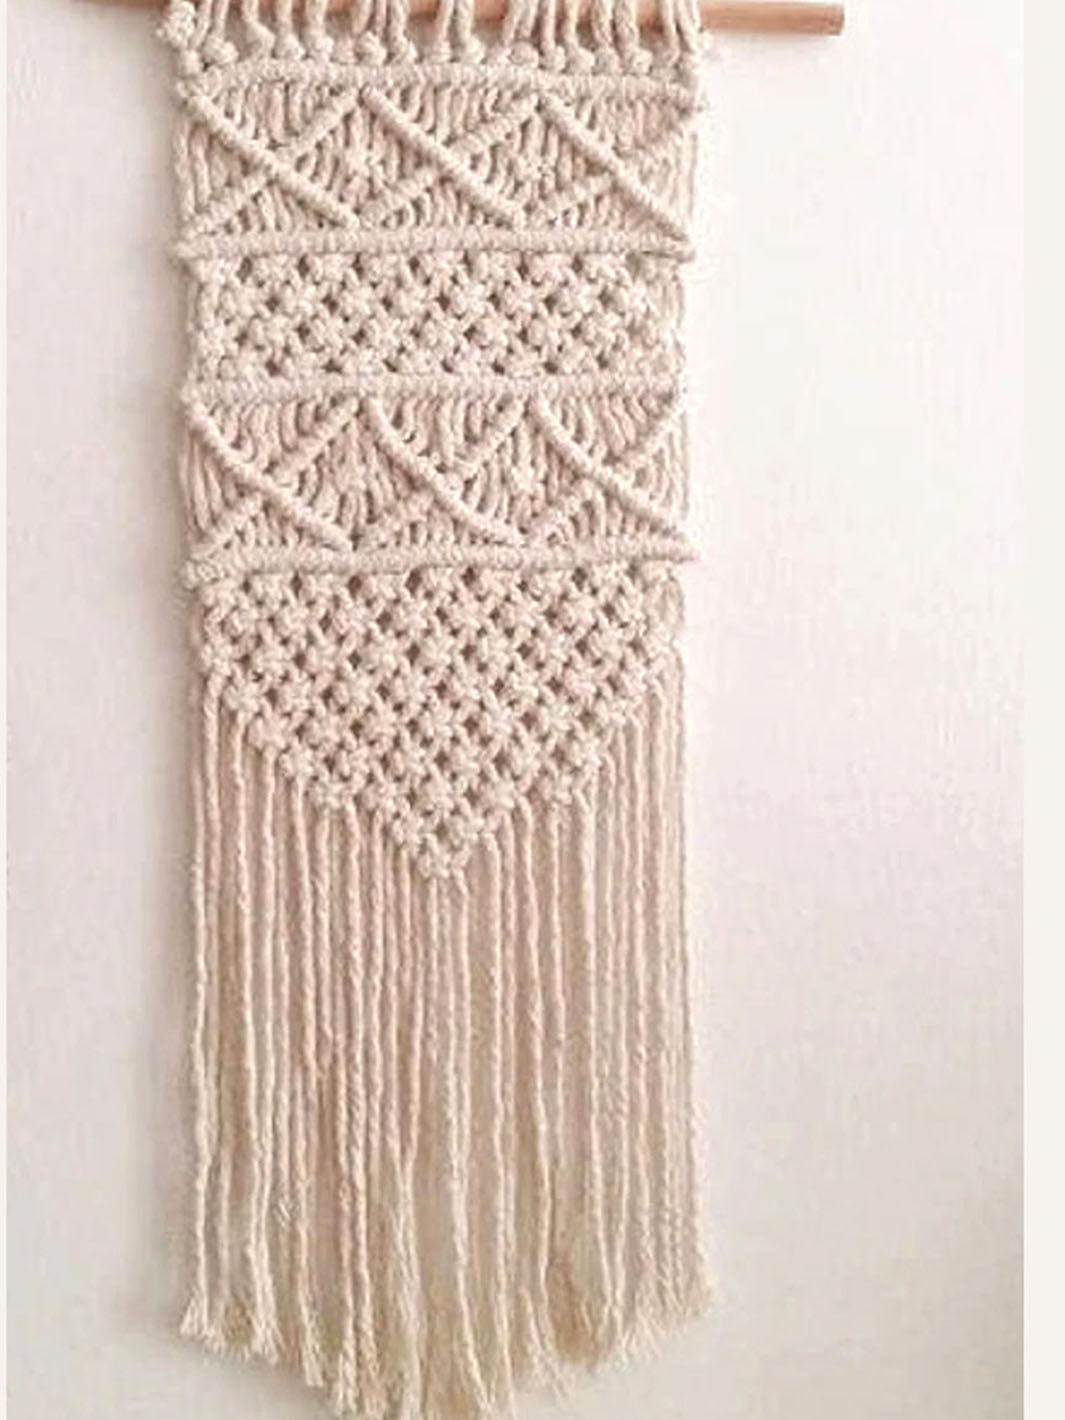 Handcrafted Macrame Wall Hanging Over Crib Wall Hanging Decoration WallKnot Curtains & Drapes WKN0151-3